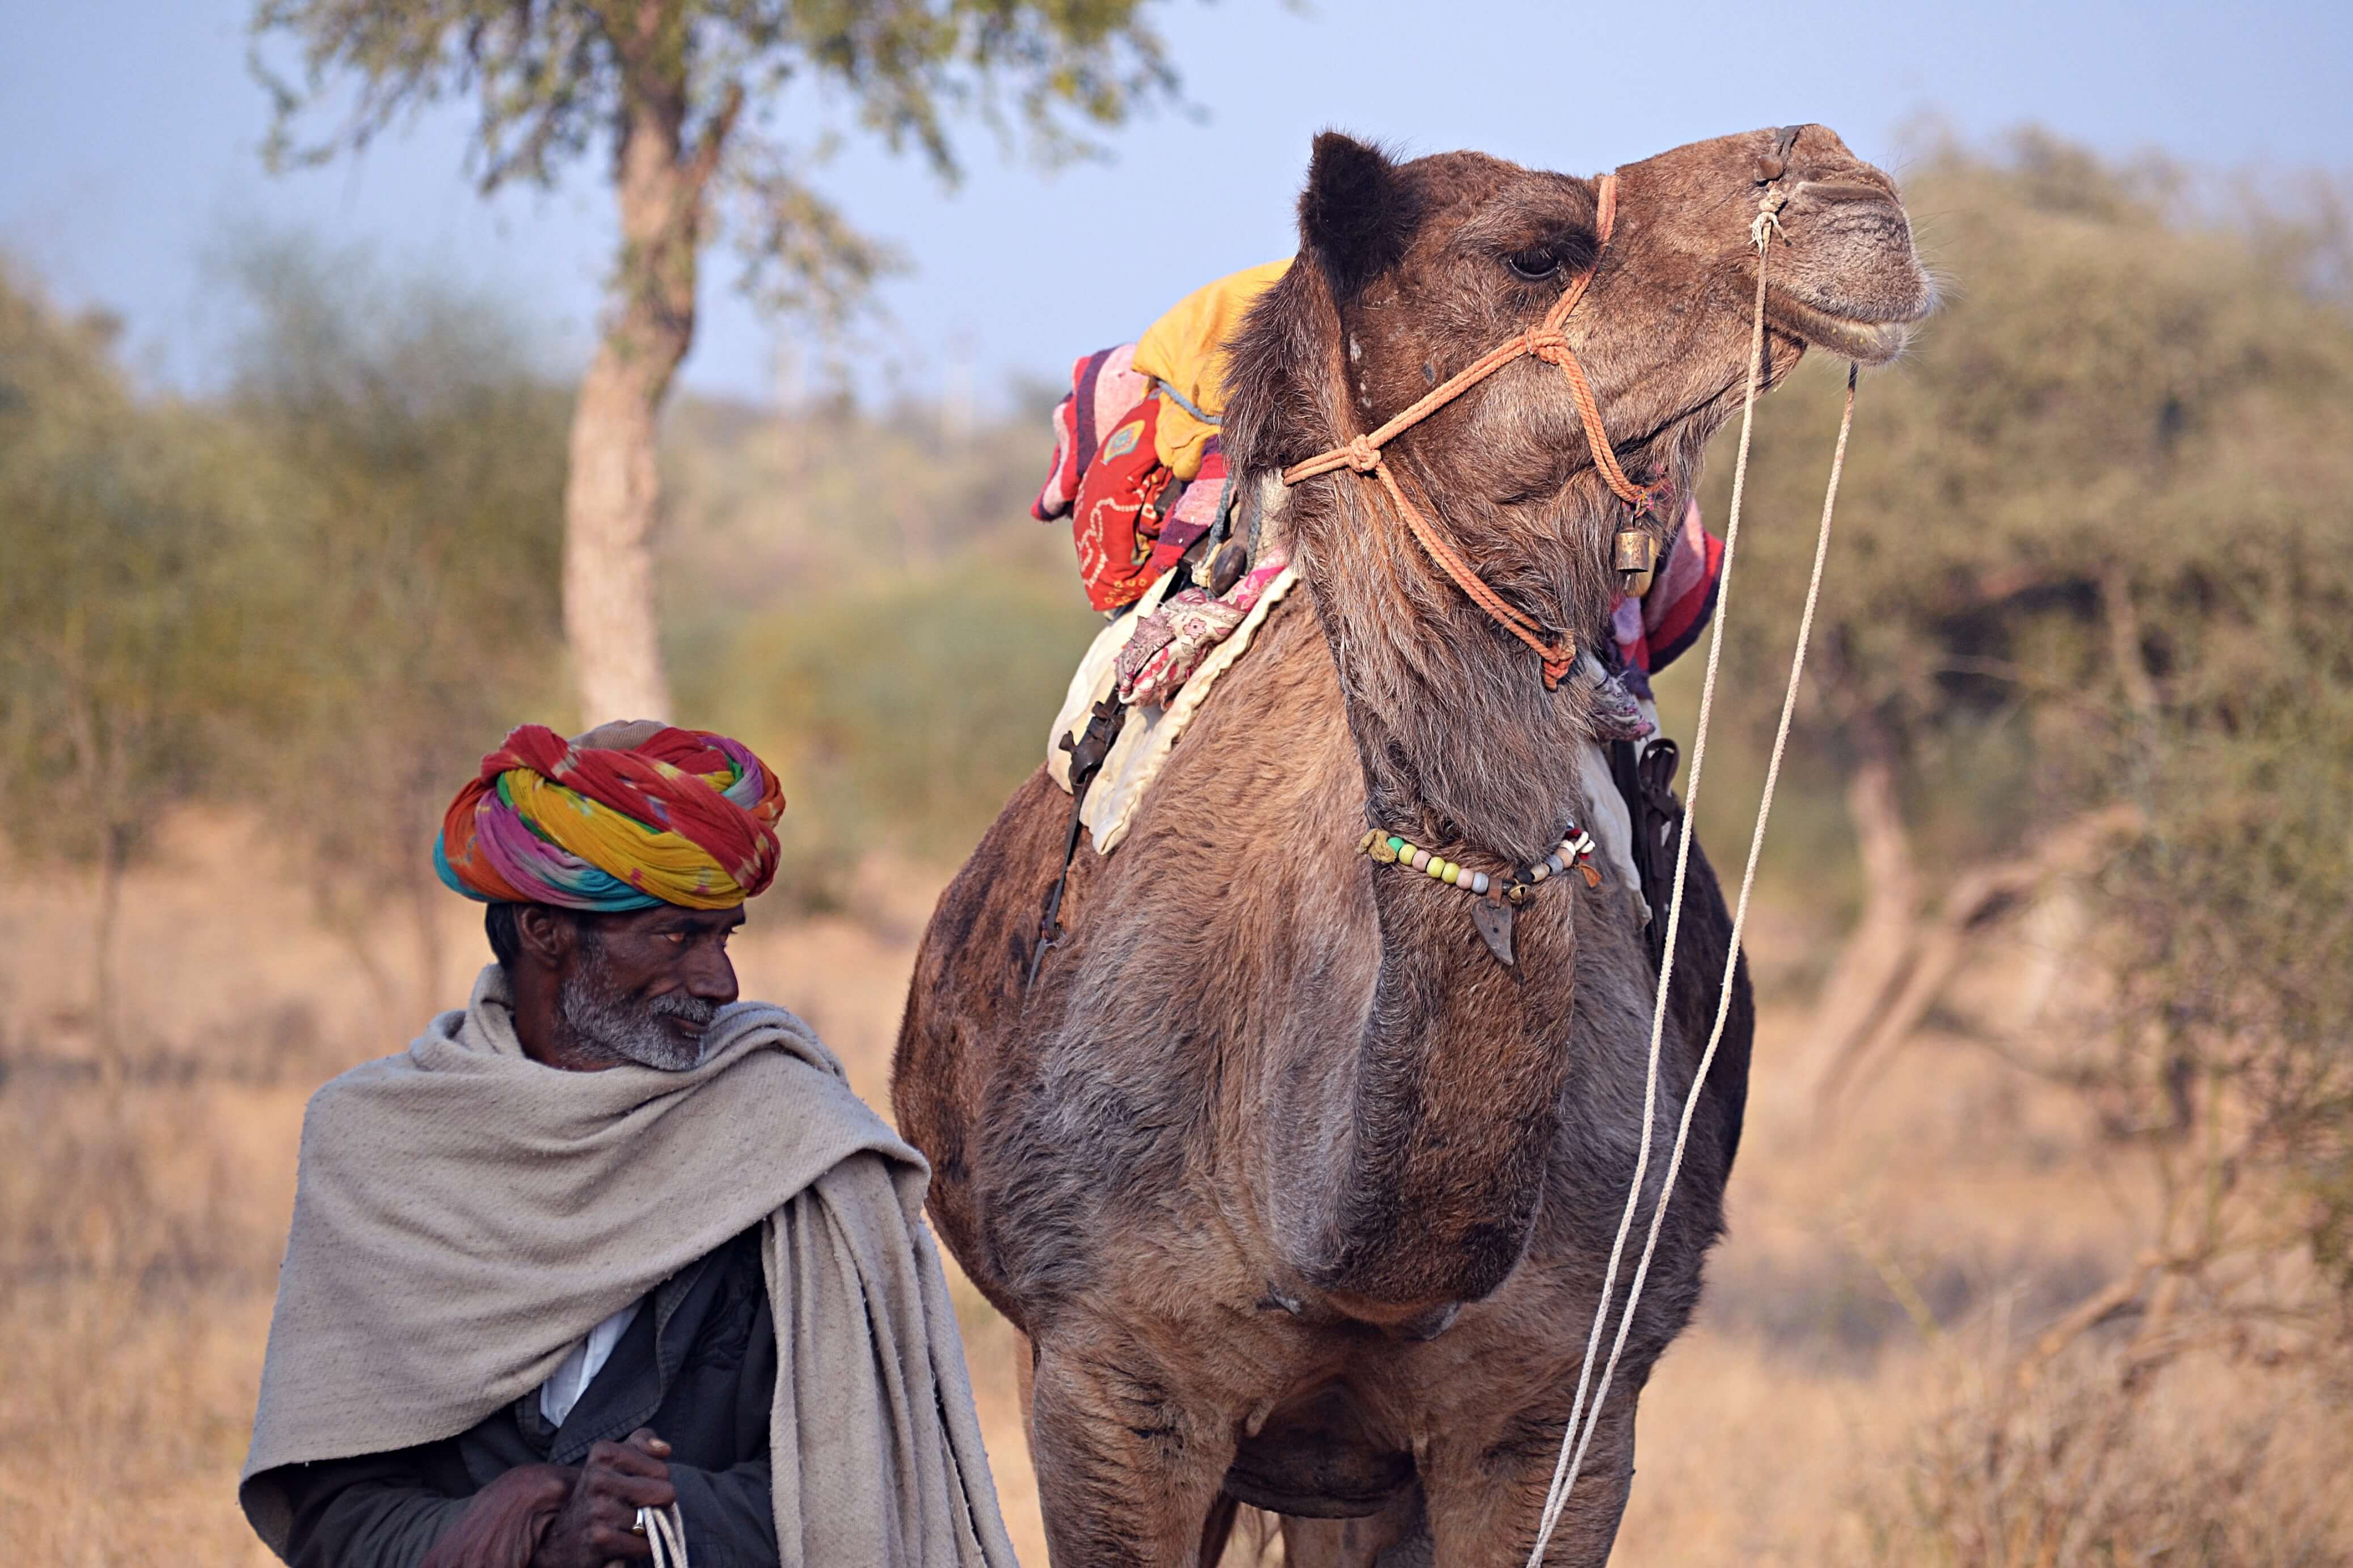 You can interact with the herders and their animals up close, before deciding if you wish to take a camel ride. Photo by Stuti Bhadauria